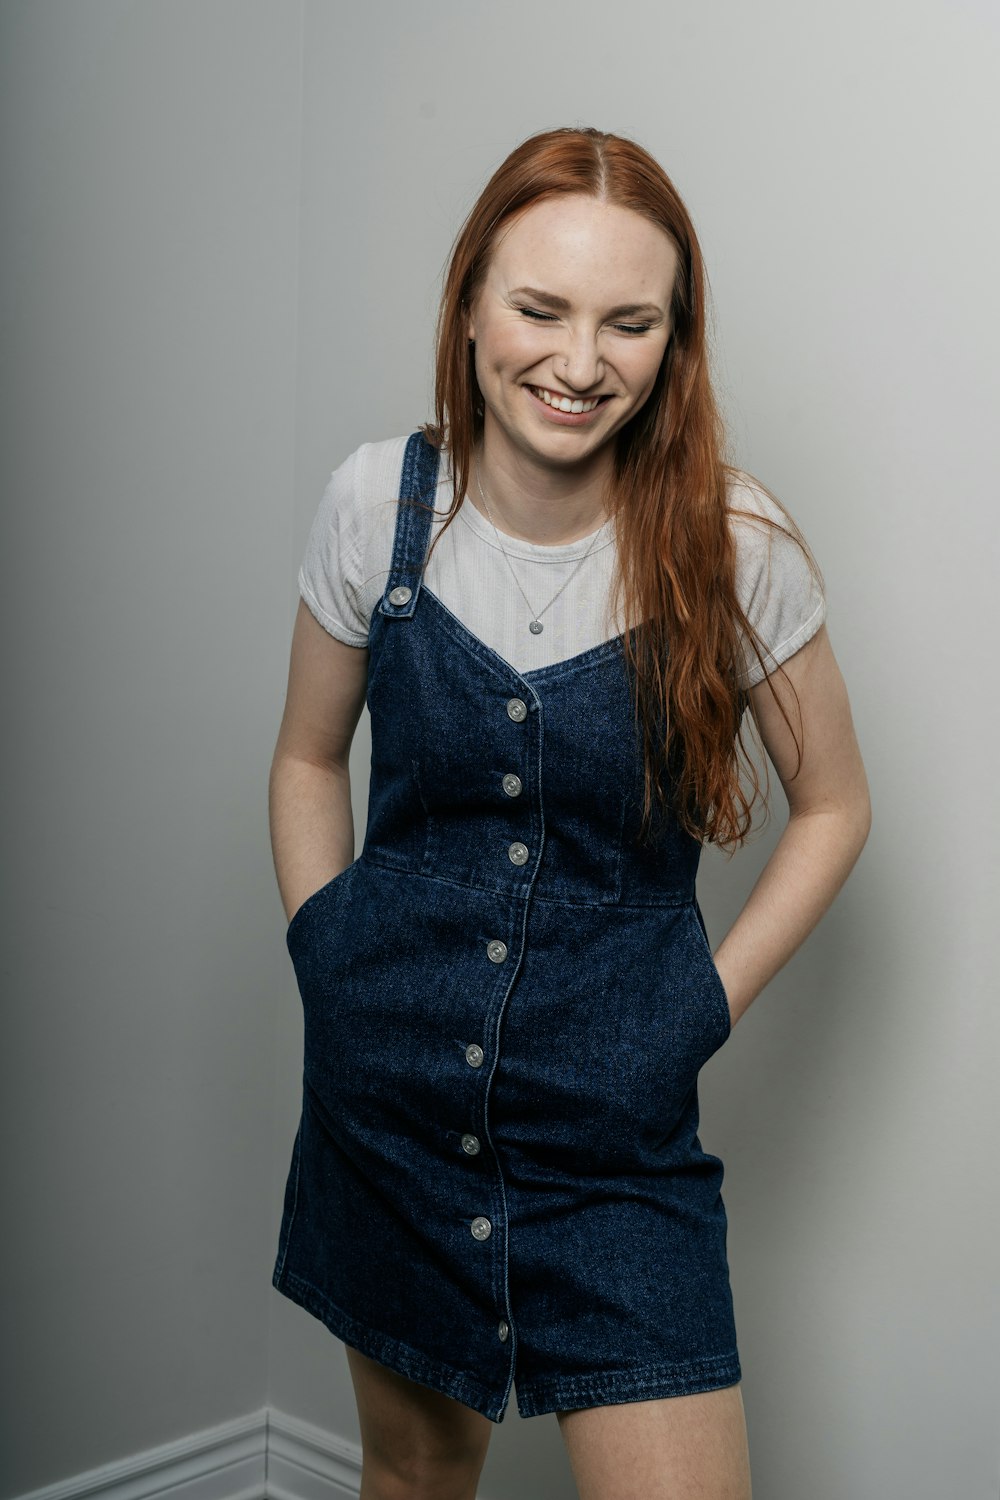 a woman with red hair wearing overalls and smiling